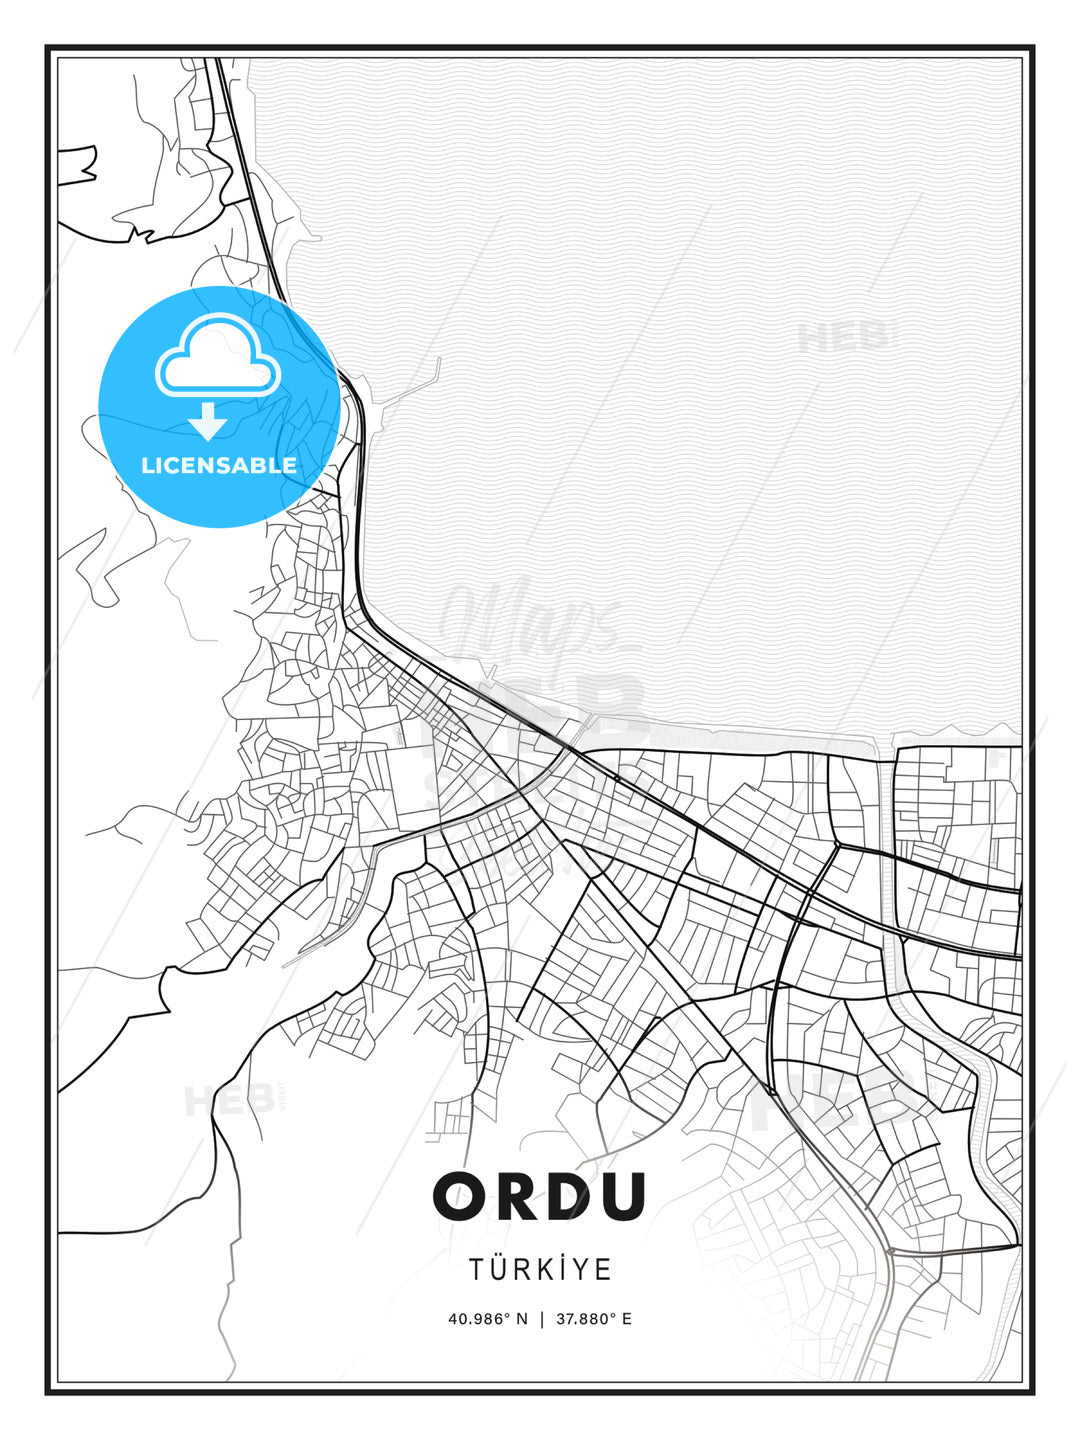 Ordu, Turkey, Modern Print Template in Various Formats - HEBSTREITS Sketches